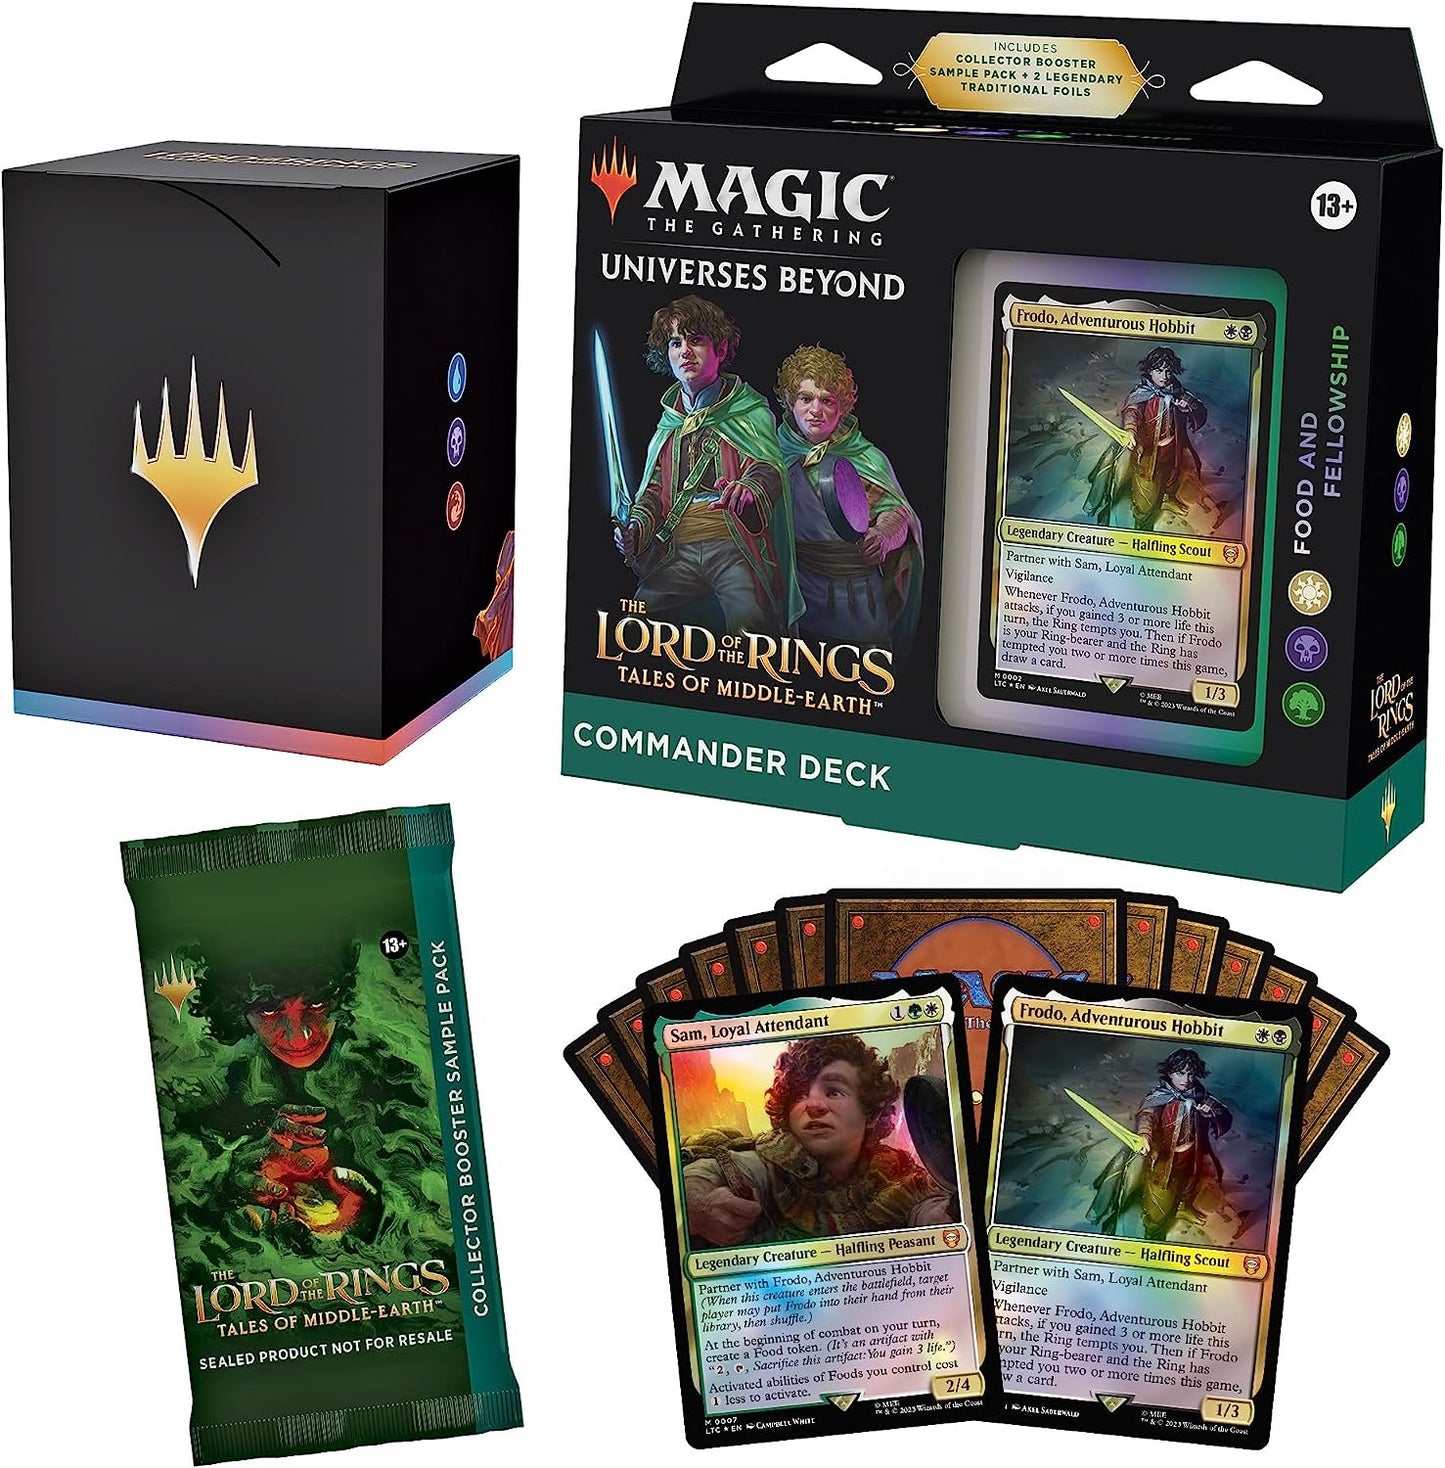 Magic The Gathering The Lord of The Rings: Tales of Middle-Earth Commander Deck